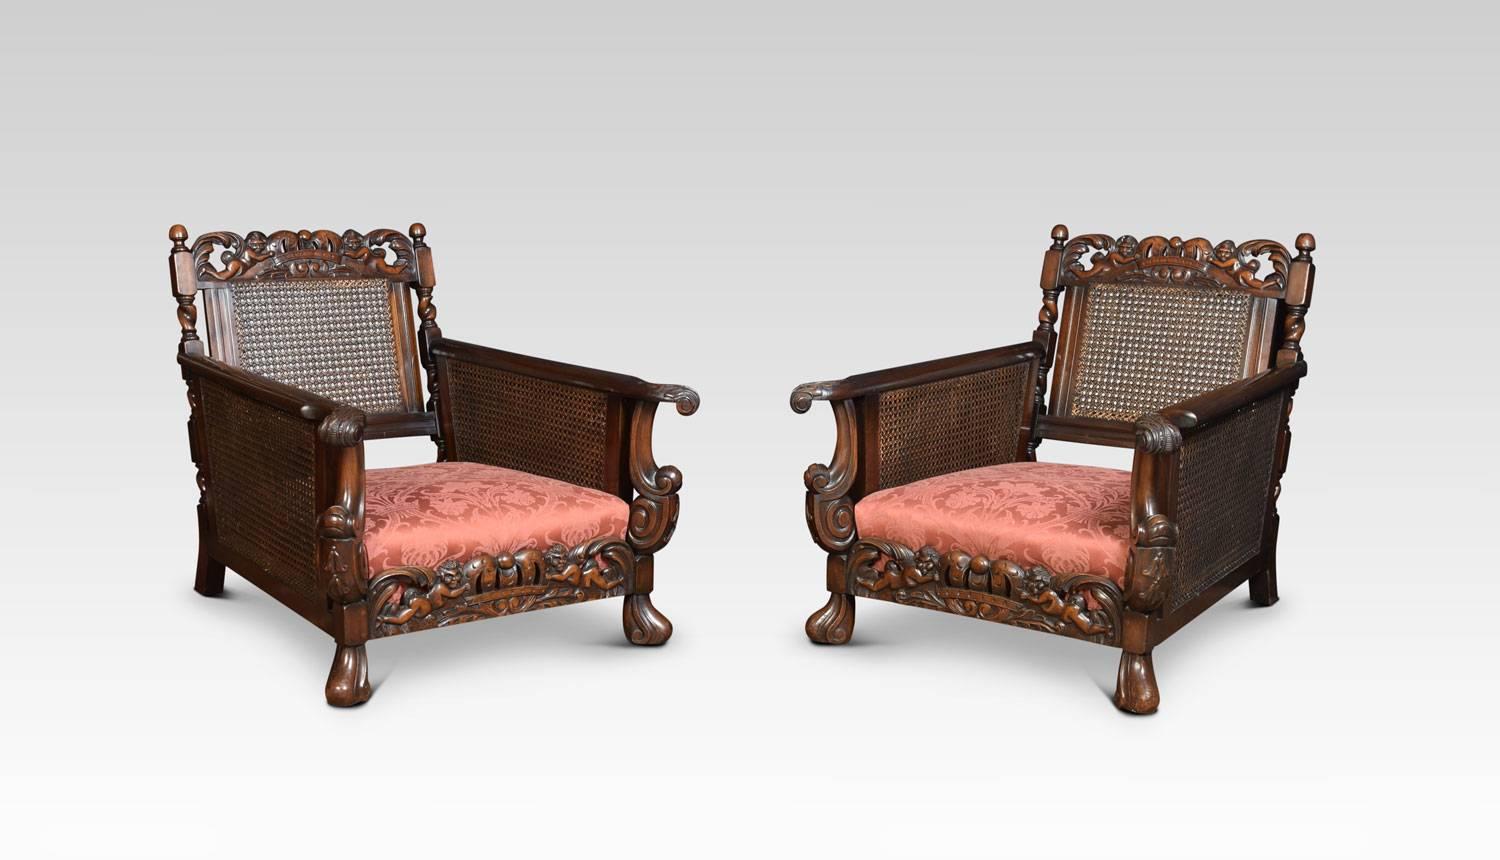 20th Century Edwardian Carved Mahogany Three-Piece Bergere Lounge Suite